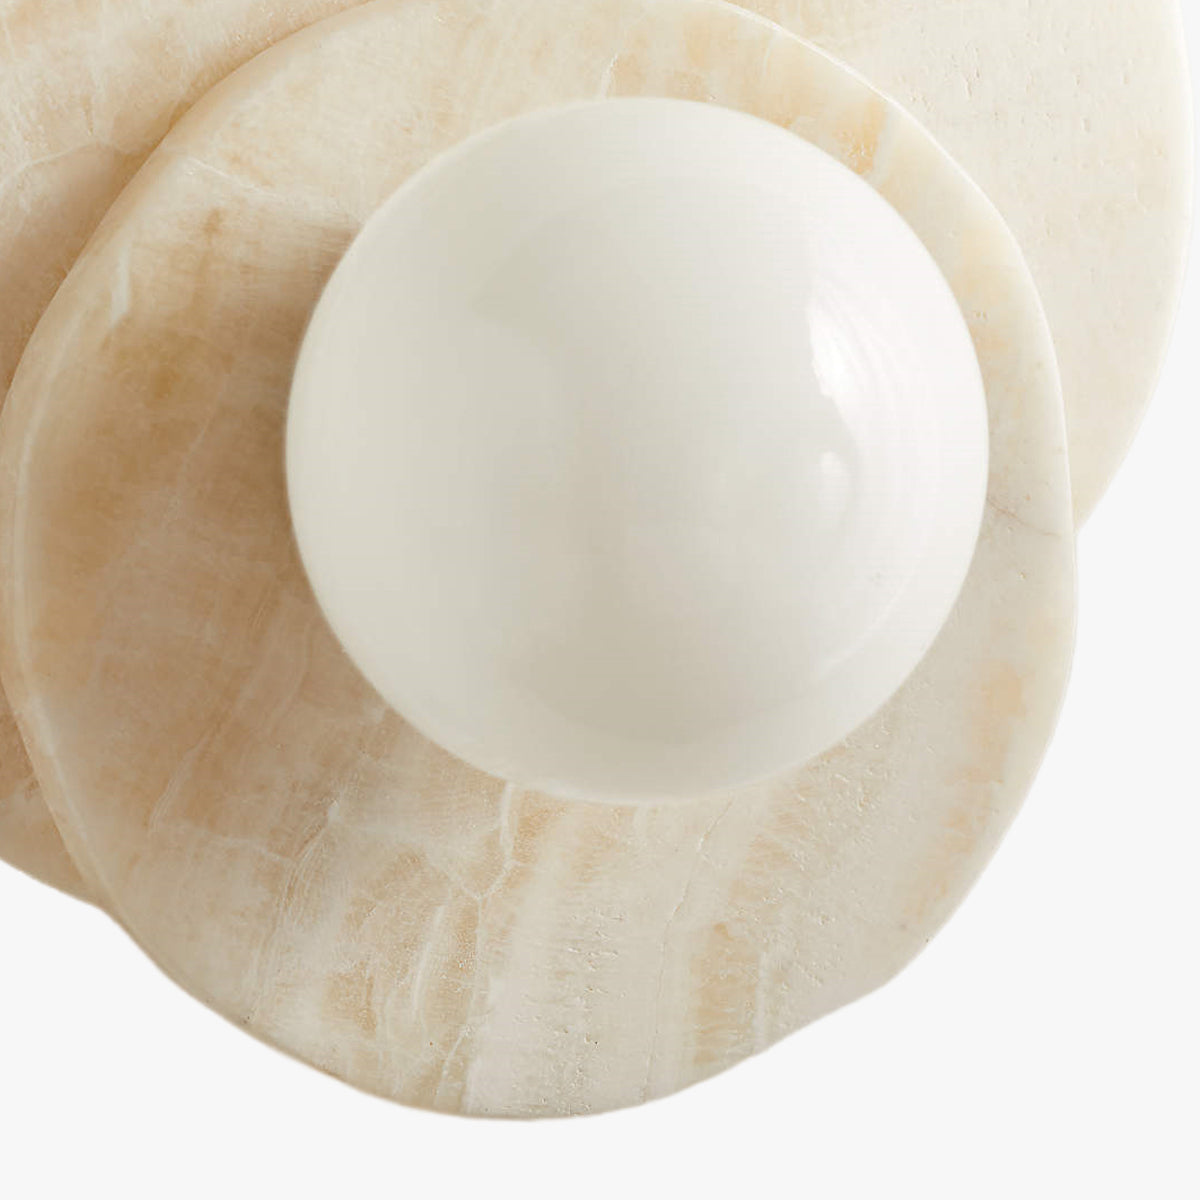 Astr White Onyx Wall Sconce 6"D x 9.75"H